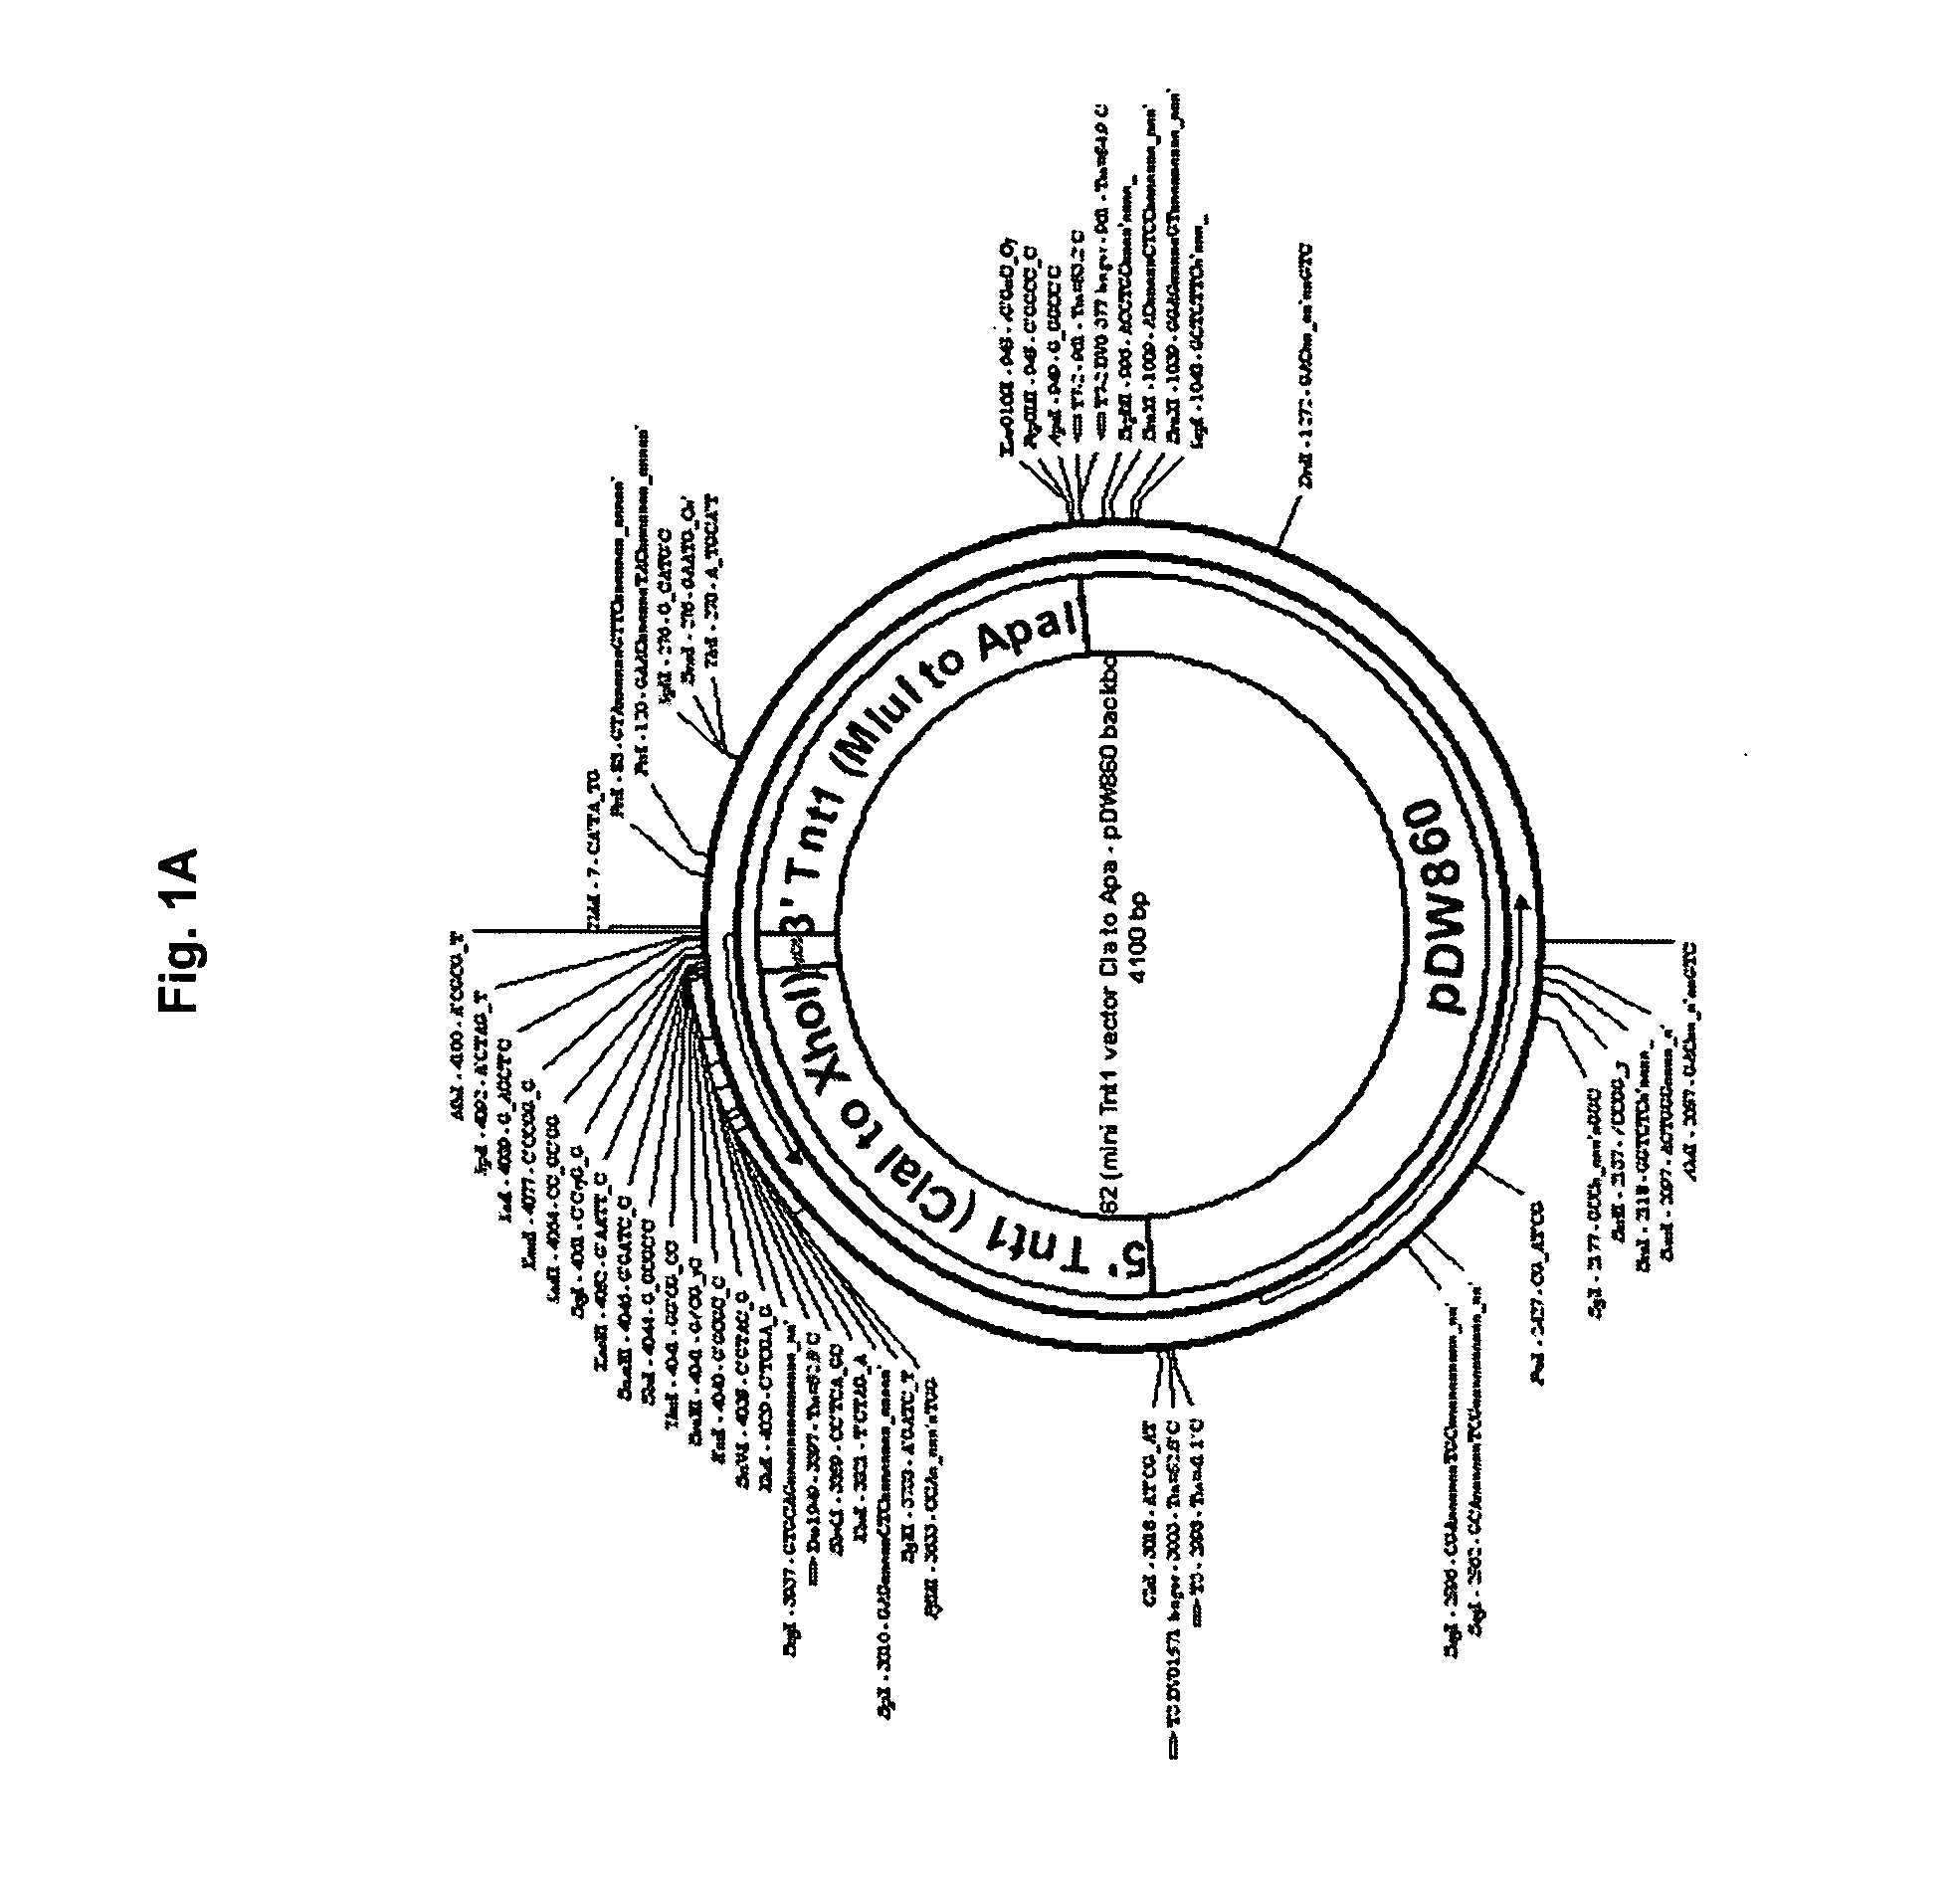 Retroelement vector system for amplification and delivery of nucleotide sequences in plants